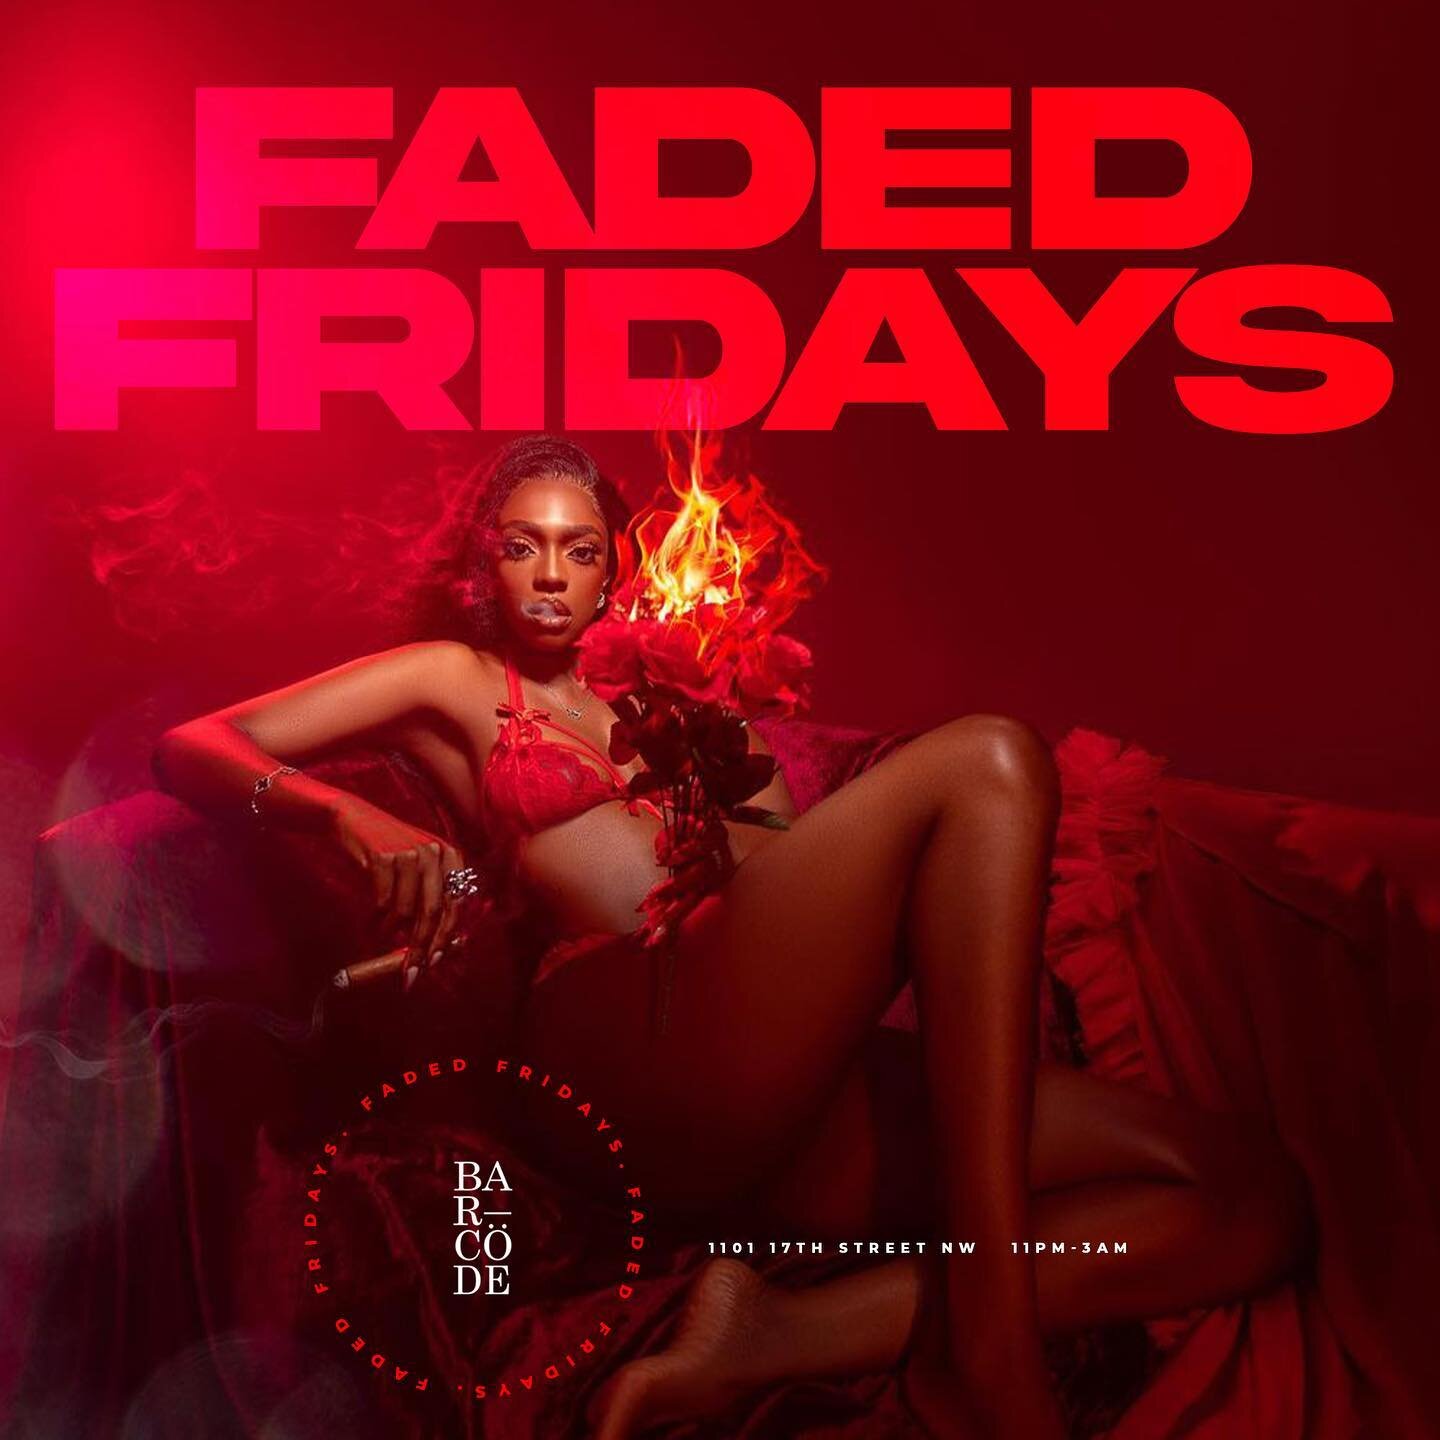 [MAR.3] Faded FRIDAYS at @BarcodeDC!
&bull;
Music by @CallMeShowtime &bull; DM for Tables/Reservations!

#BarcodeFridays #FadedFridays #TheCode
.
.
.
.
.
#DCNightlife #DCEvents #DMVEvents #DCHappyHour #party #music #love #dance #birthday #instagood #